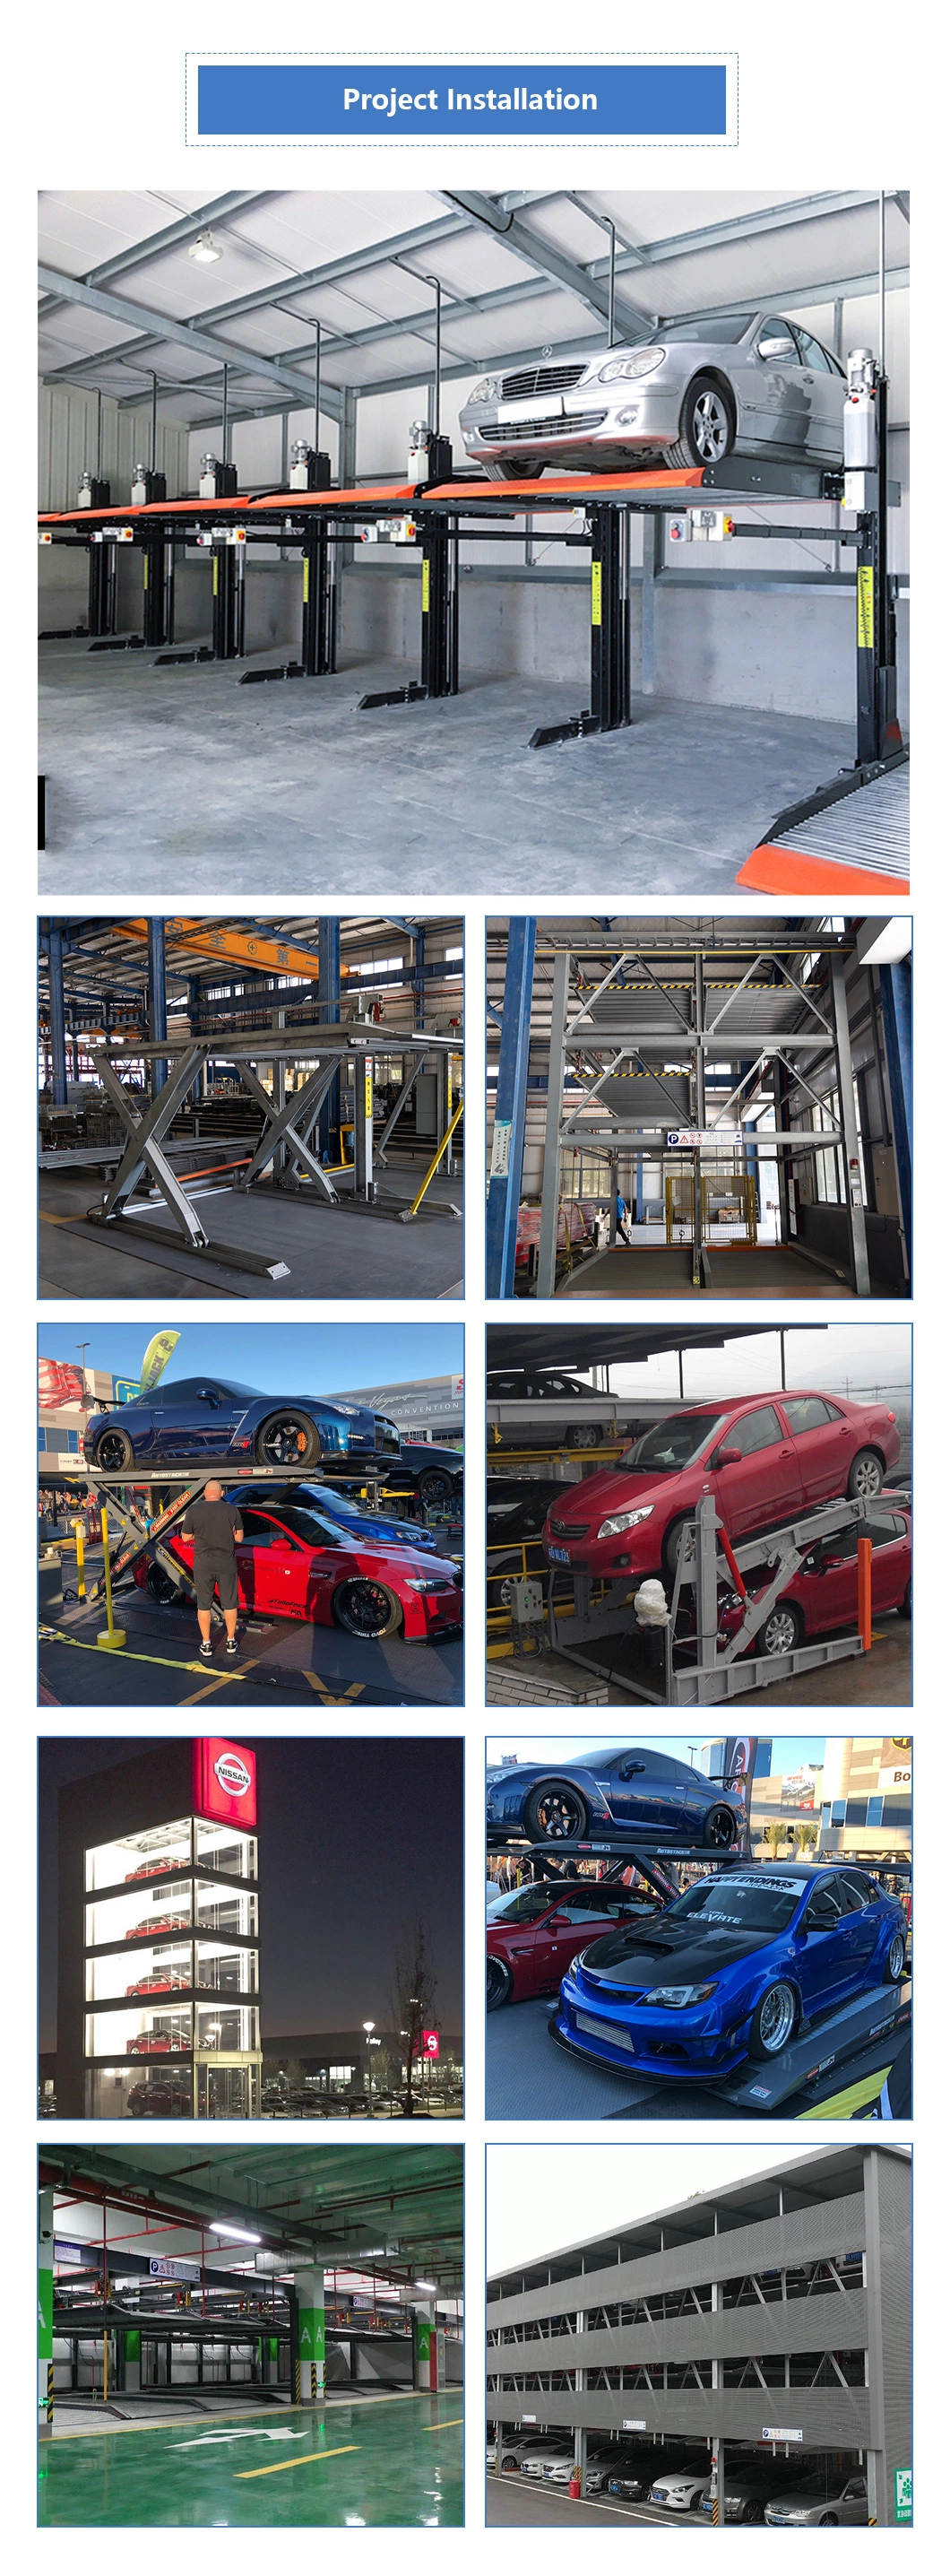 Parking Garage Evolution: Hydraulic Lifts for Multi-Level Conveyors